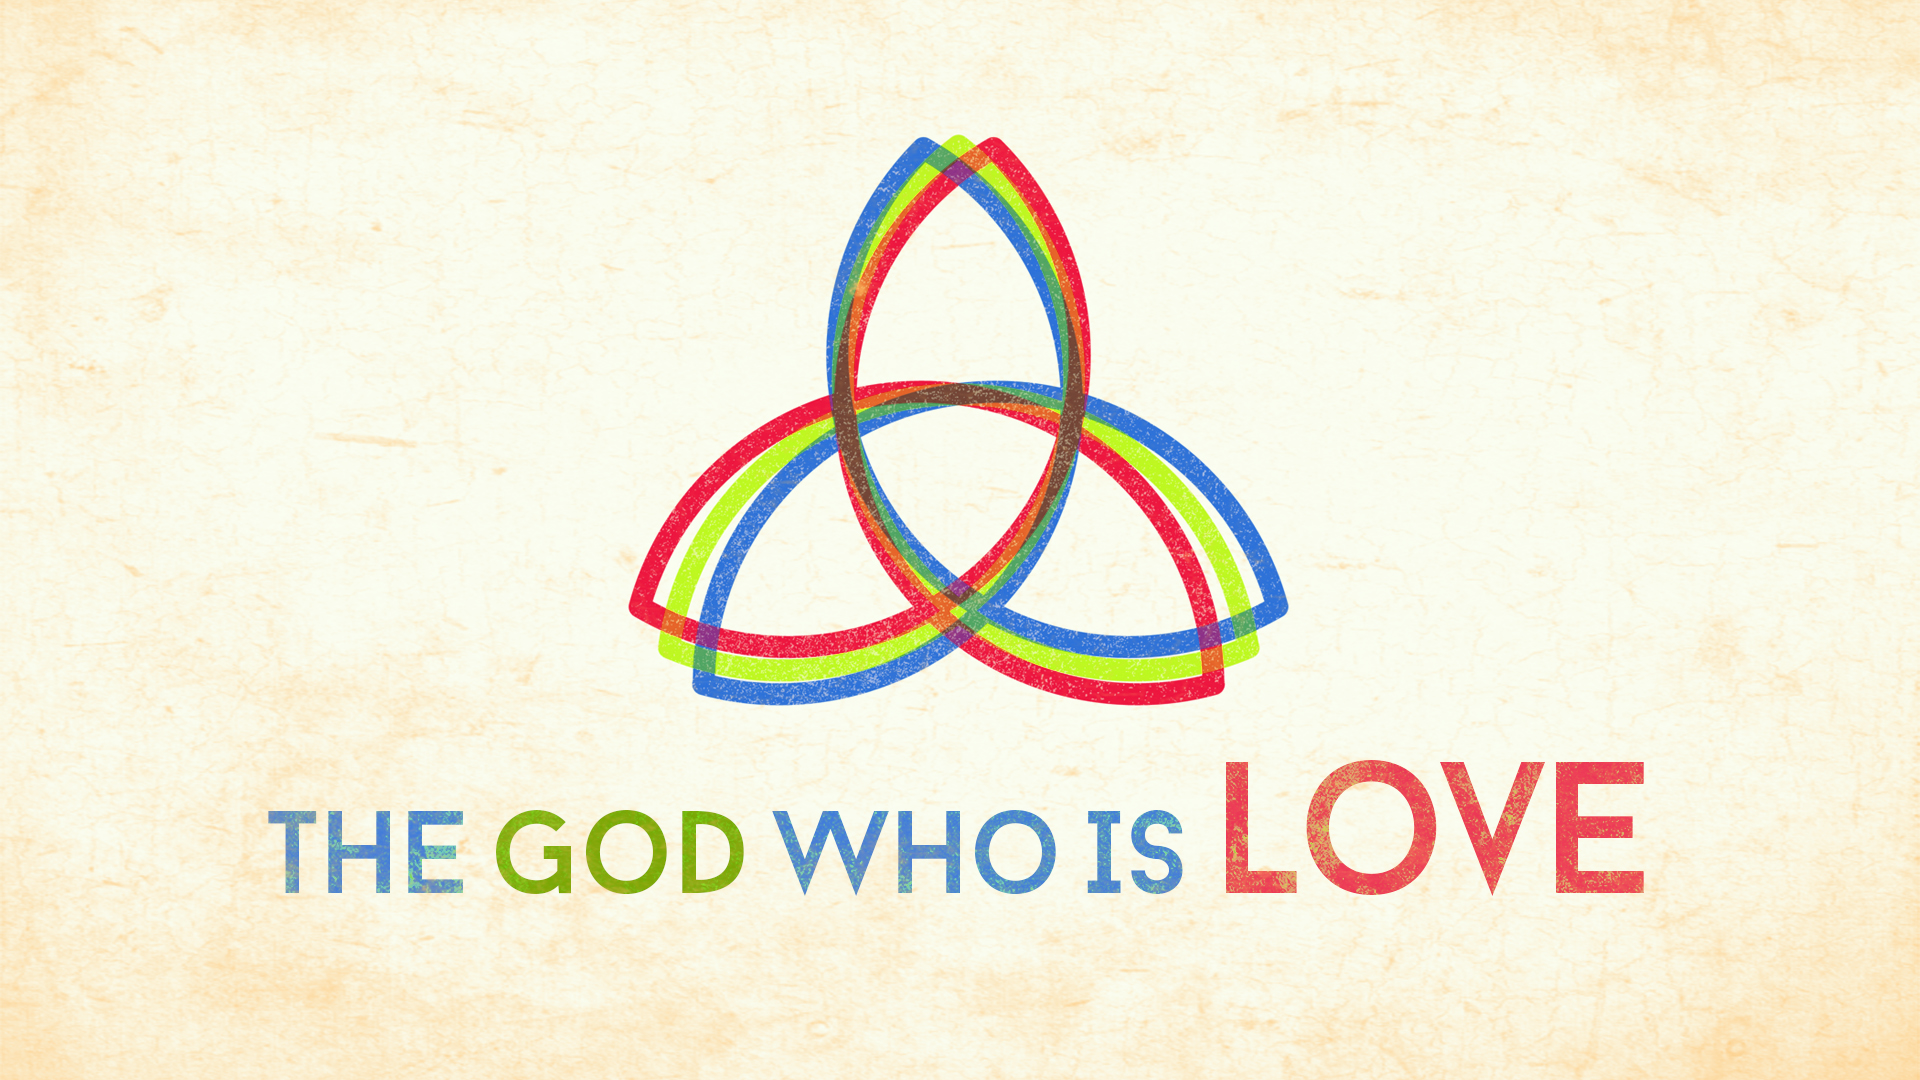 The God Who is Love